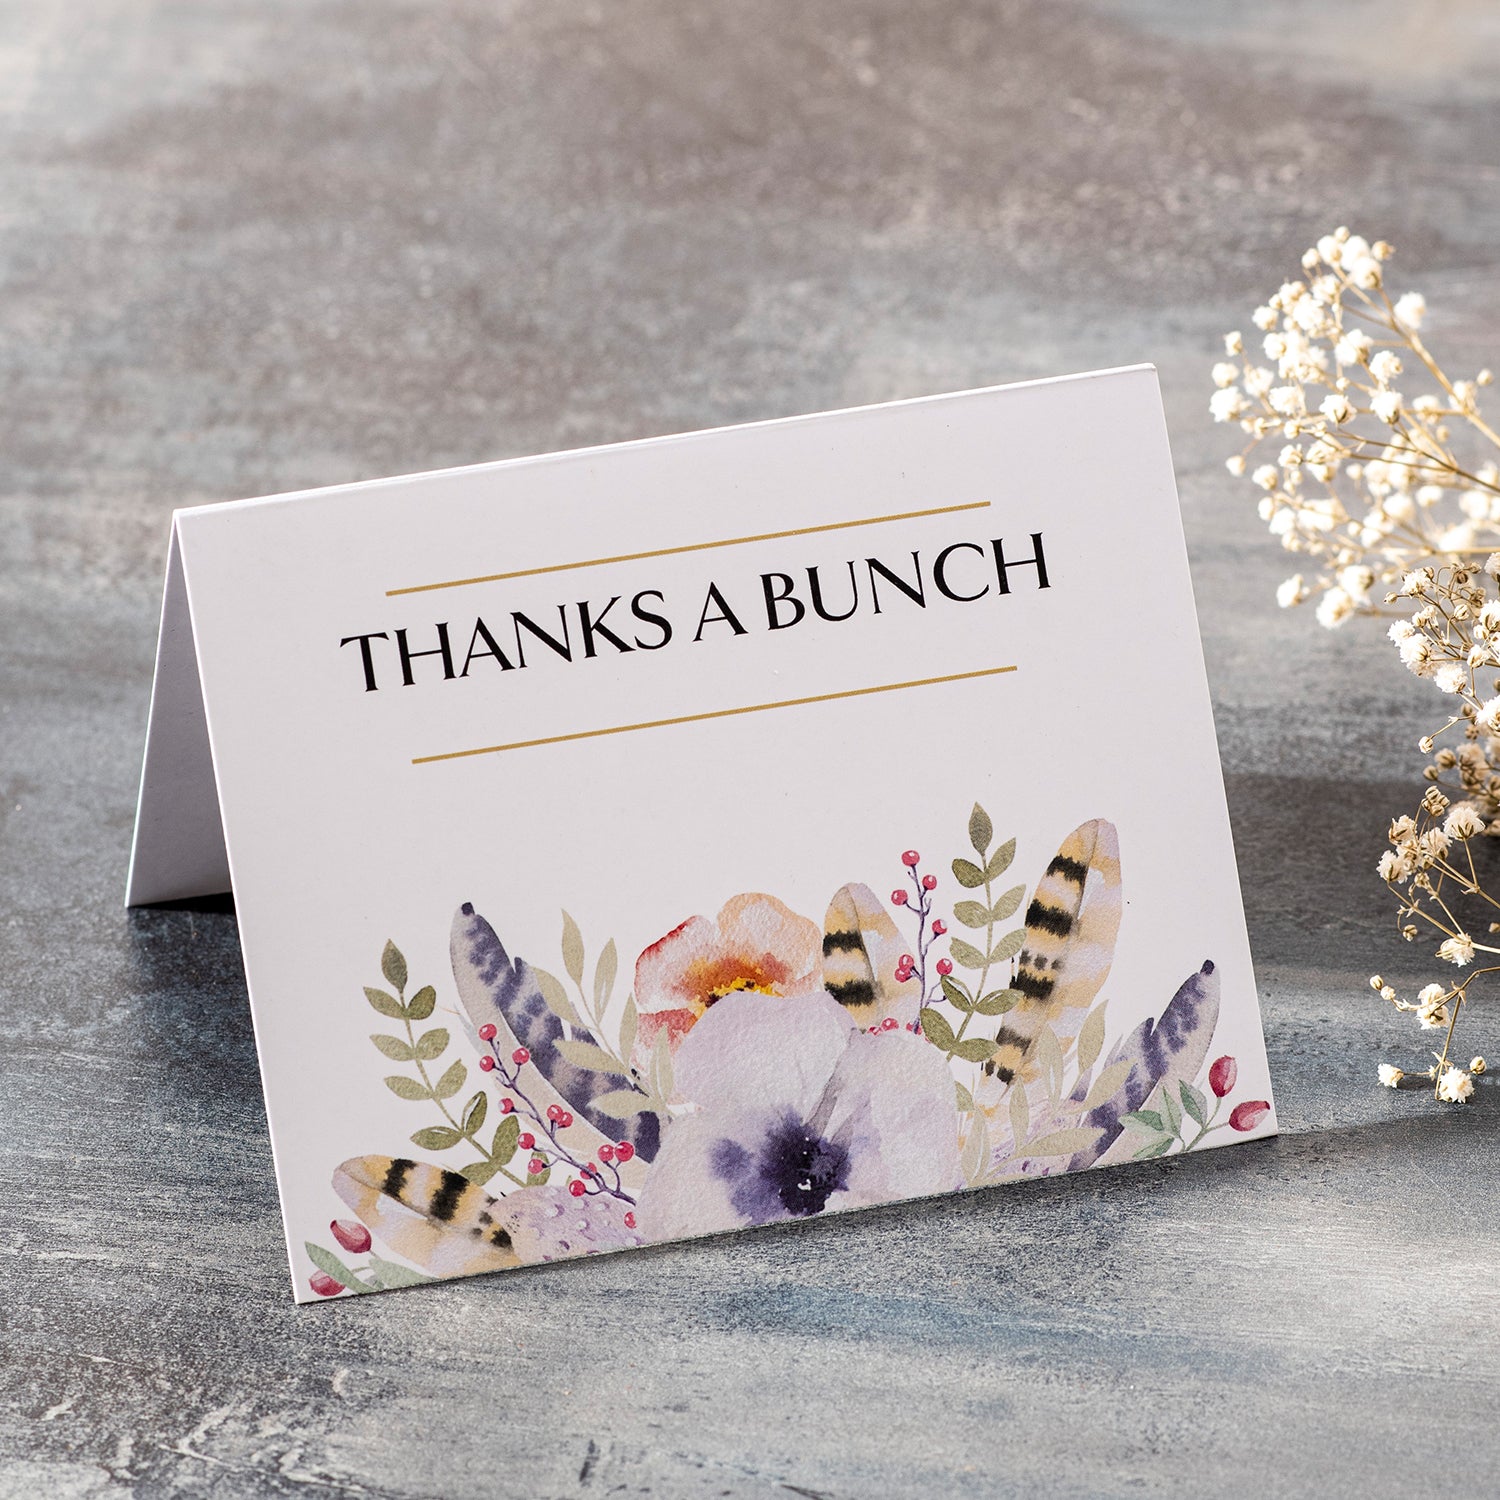 Thank you Greeting Card